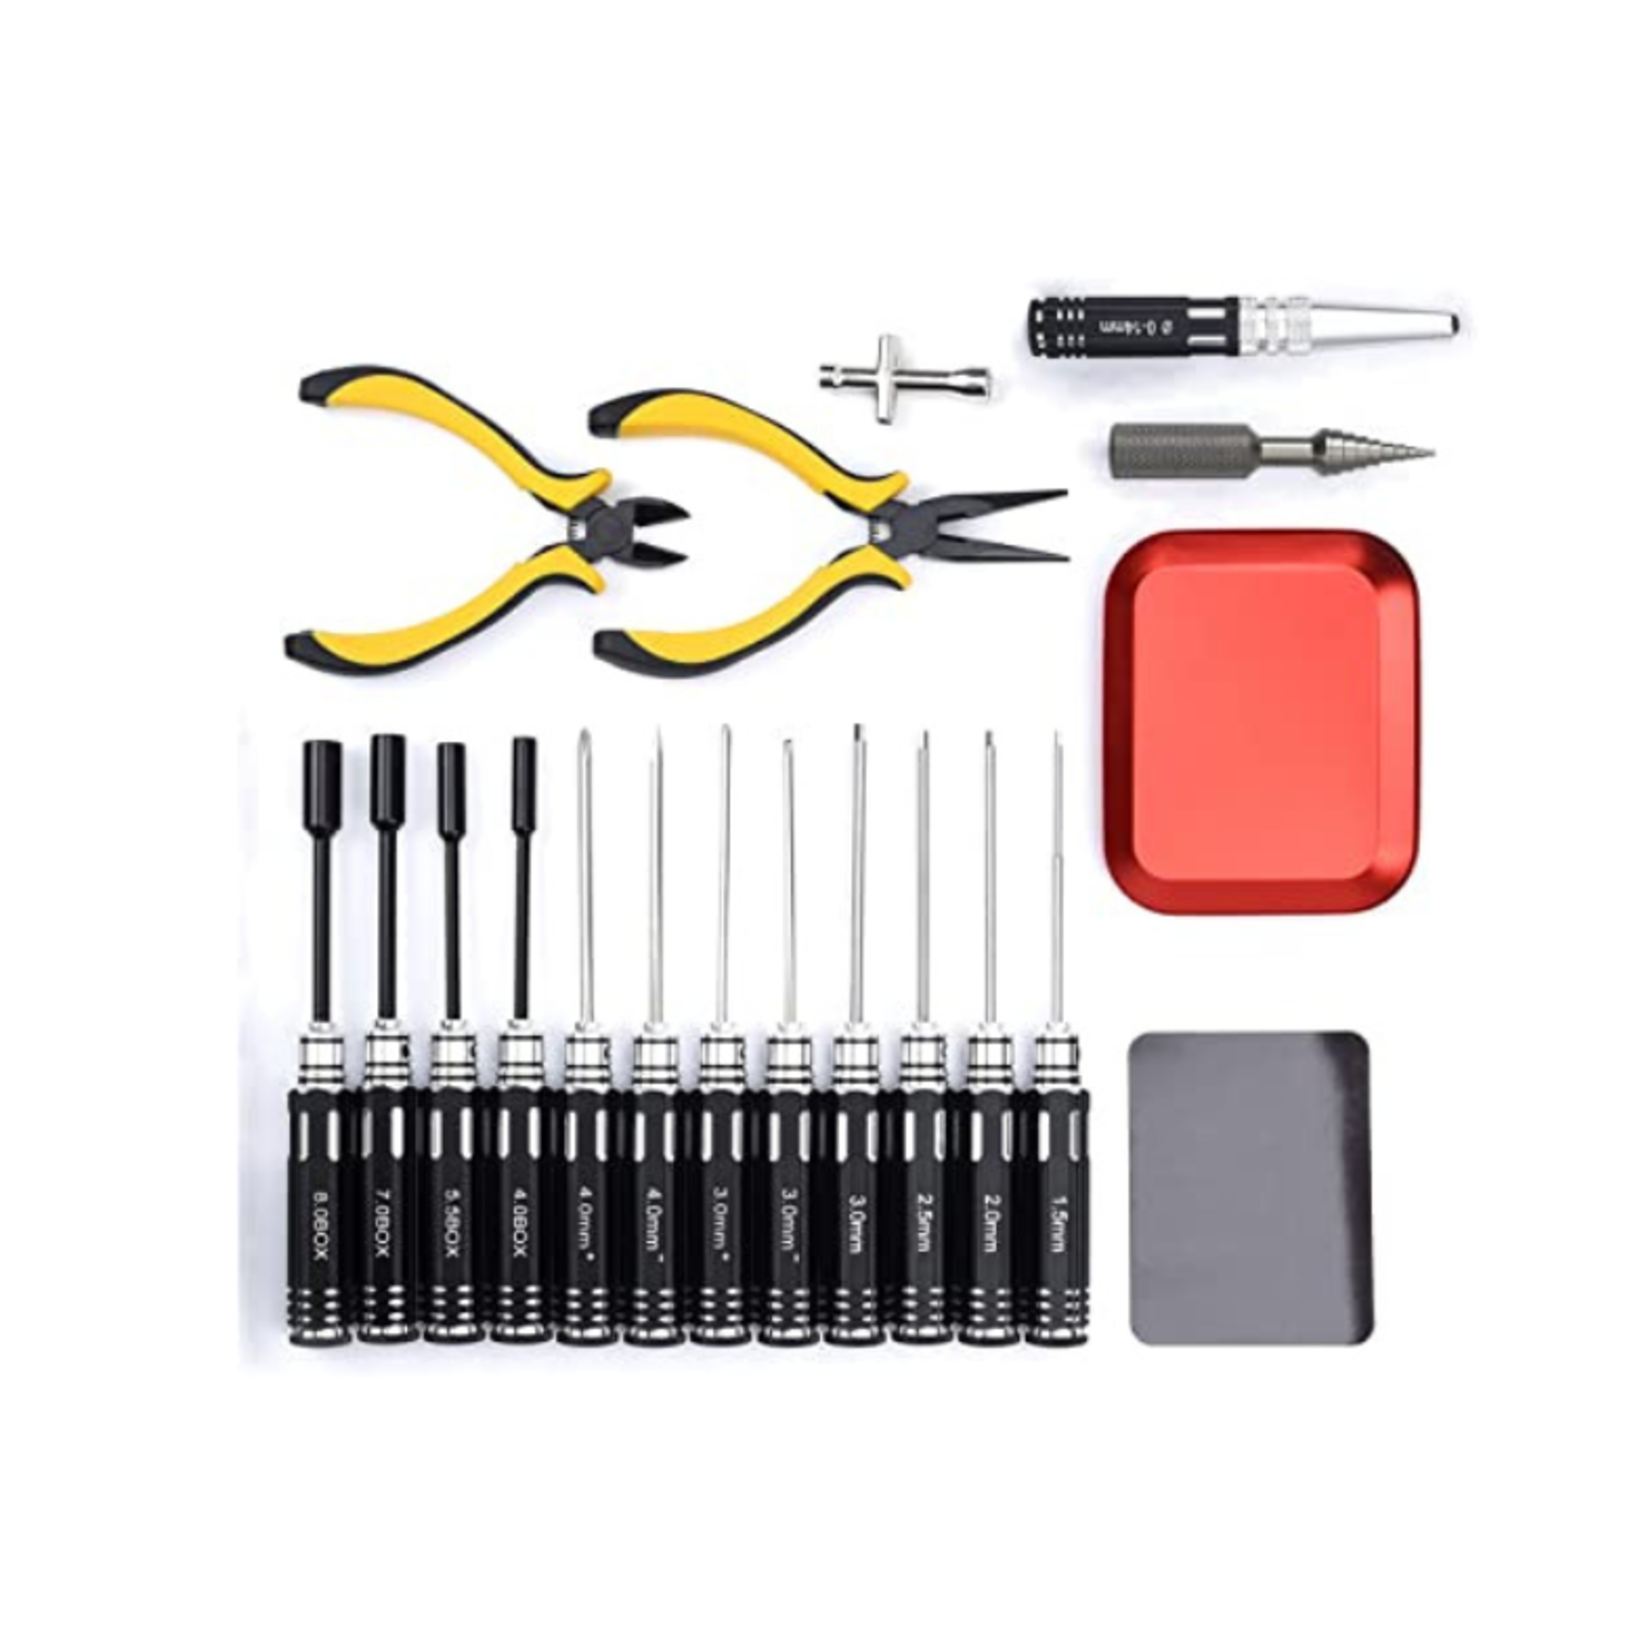 Fpvdrone 18in1 RC Tool Kit